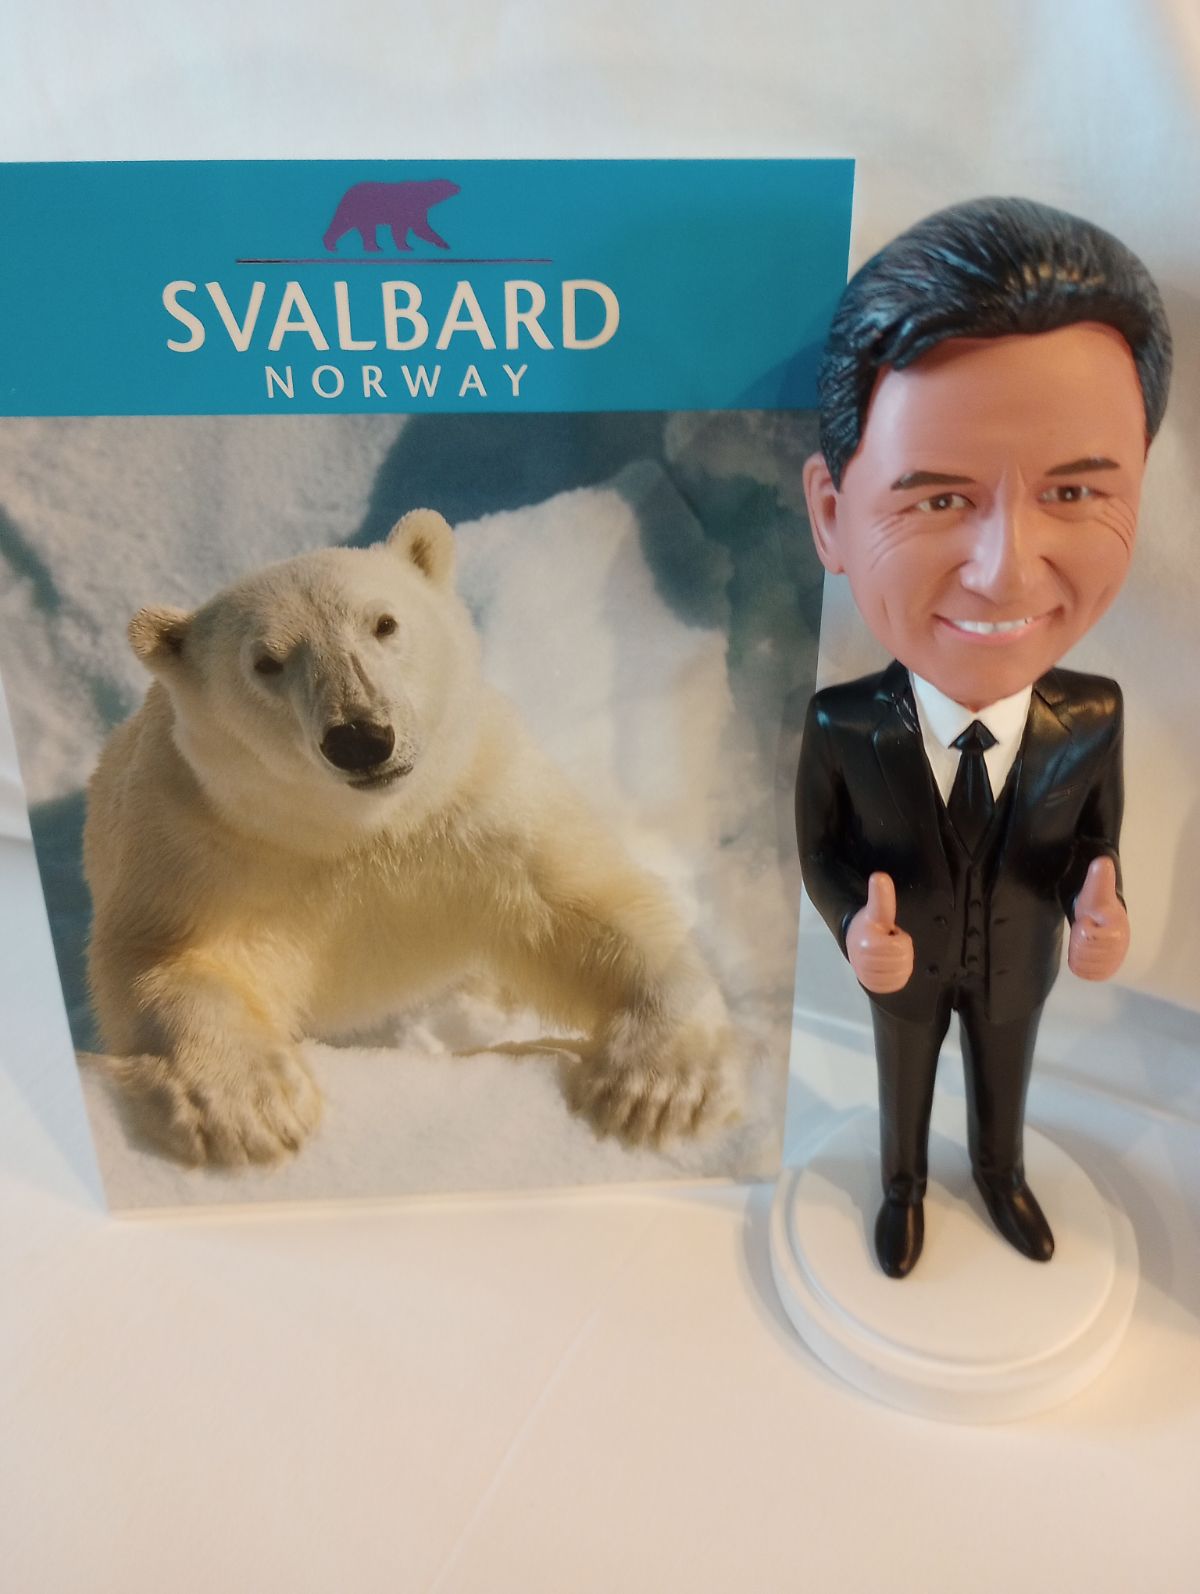 Little Jimmy visiting Svalbard Island, Norway in the Arctic Circle